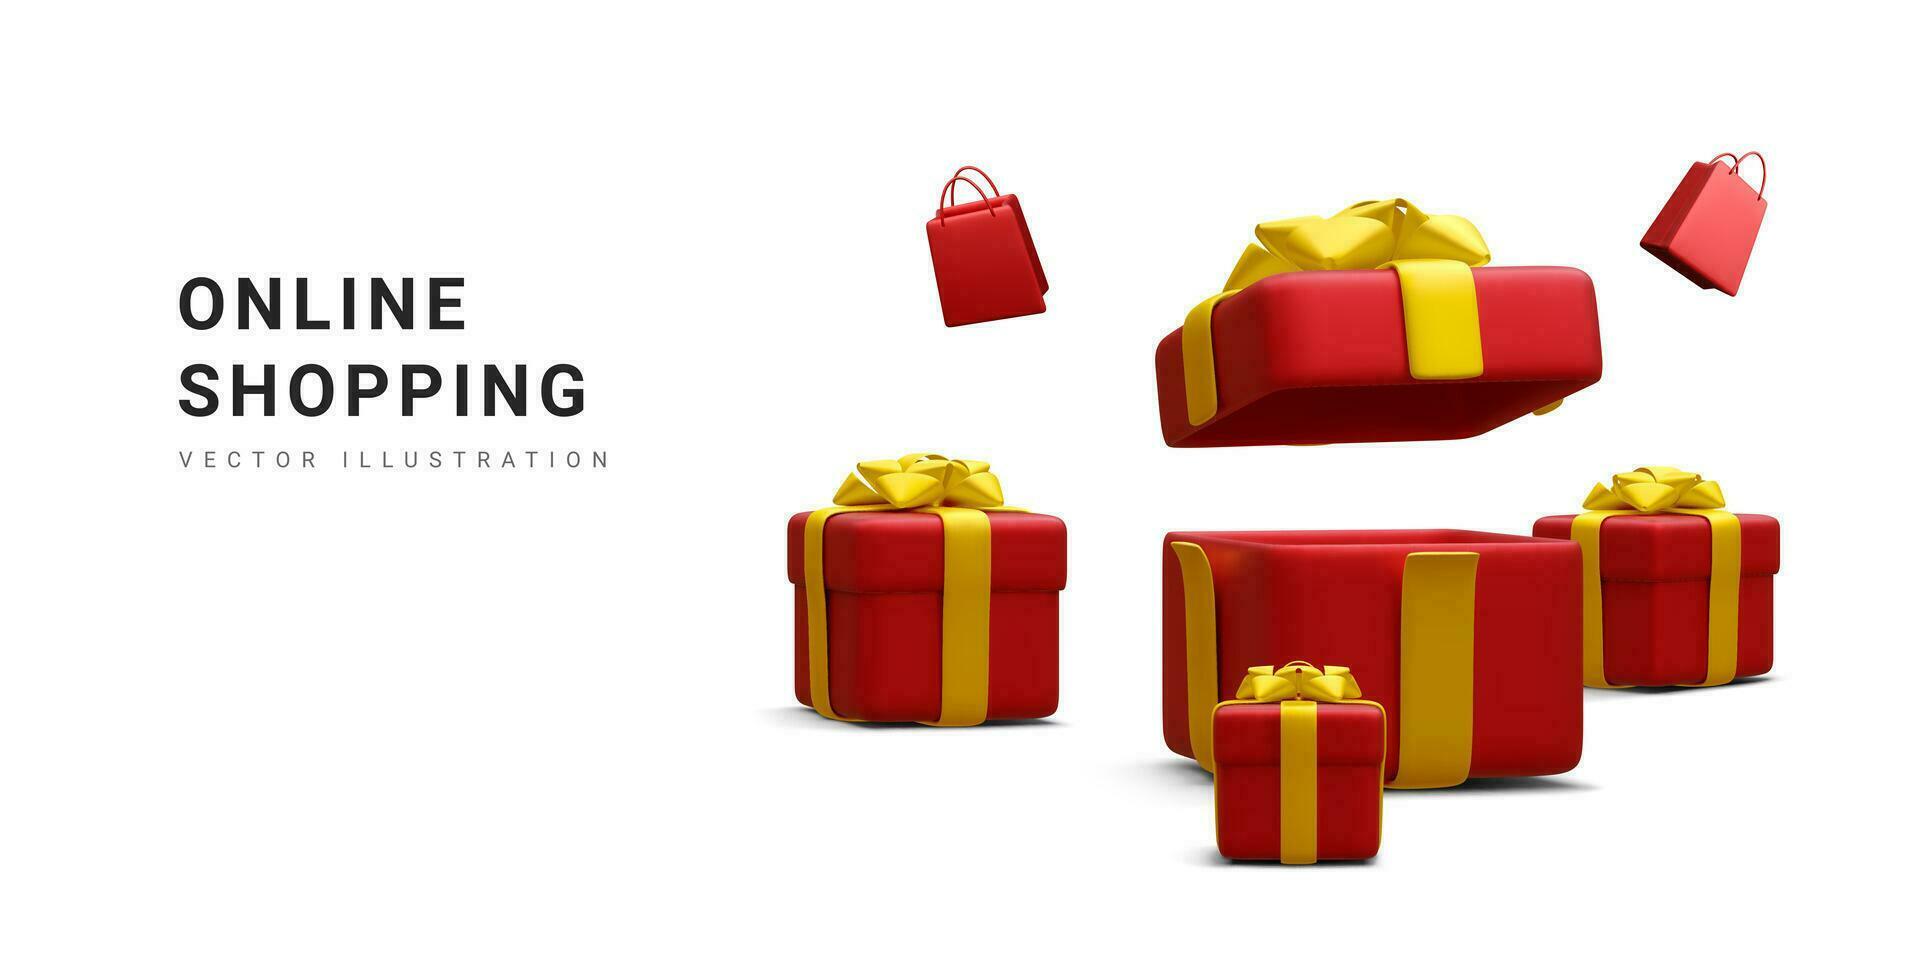 3d realistic banner for online shopping with shopping bag and gift box isolated on white background.  Vector illustration